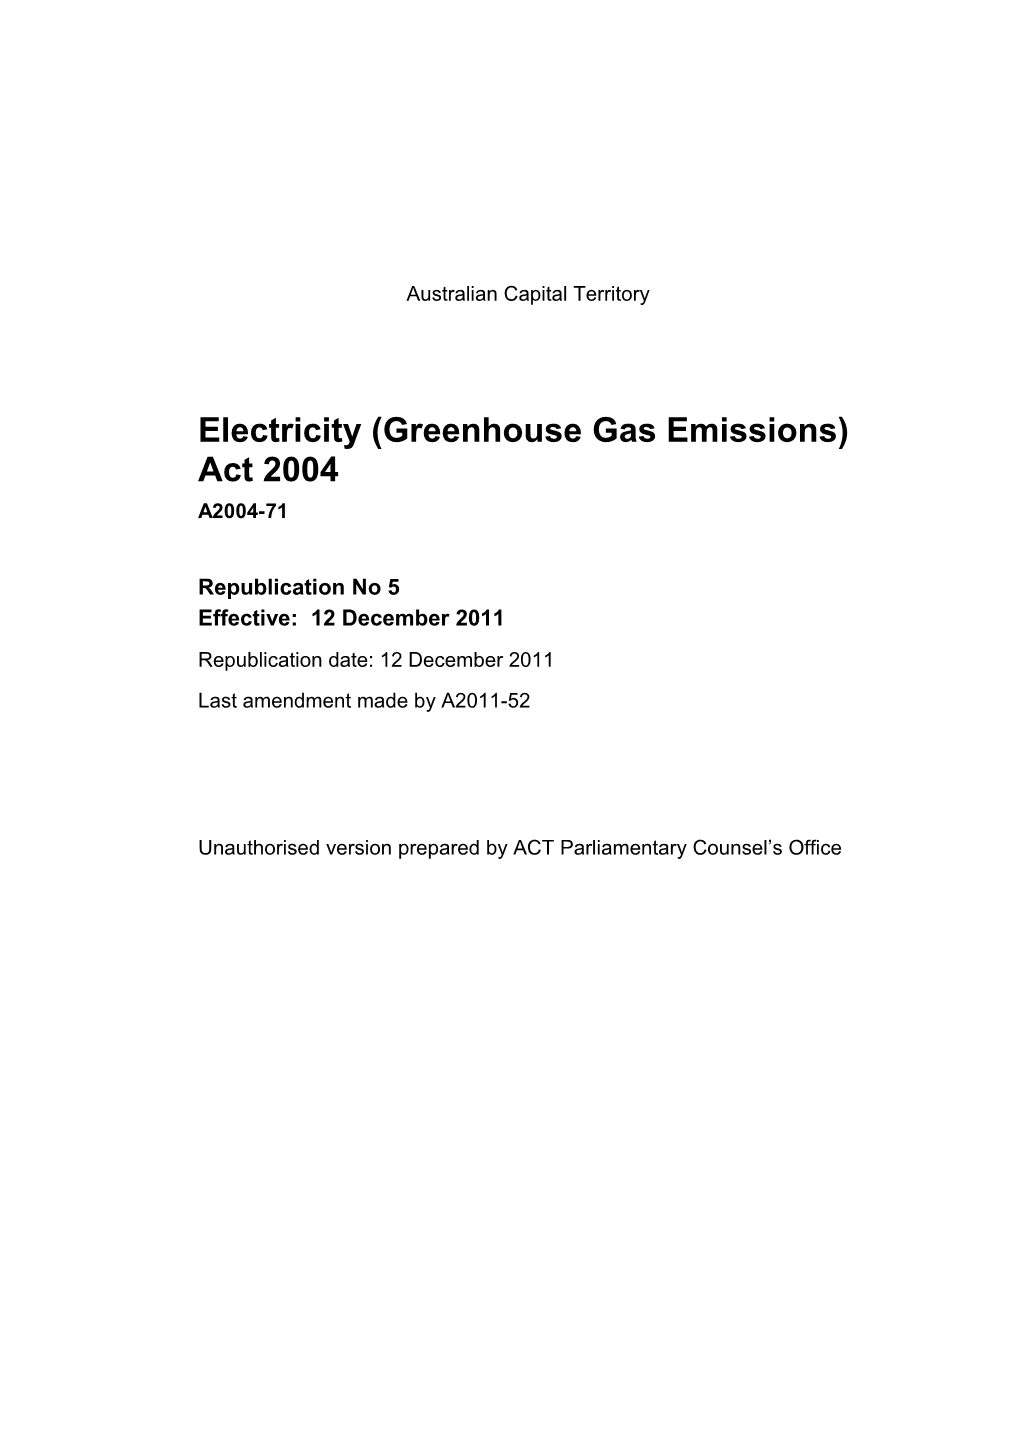 Electricity (Greenhouse Gas Emissions) Act 2004